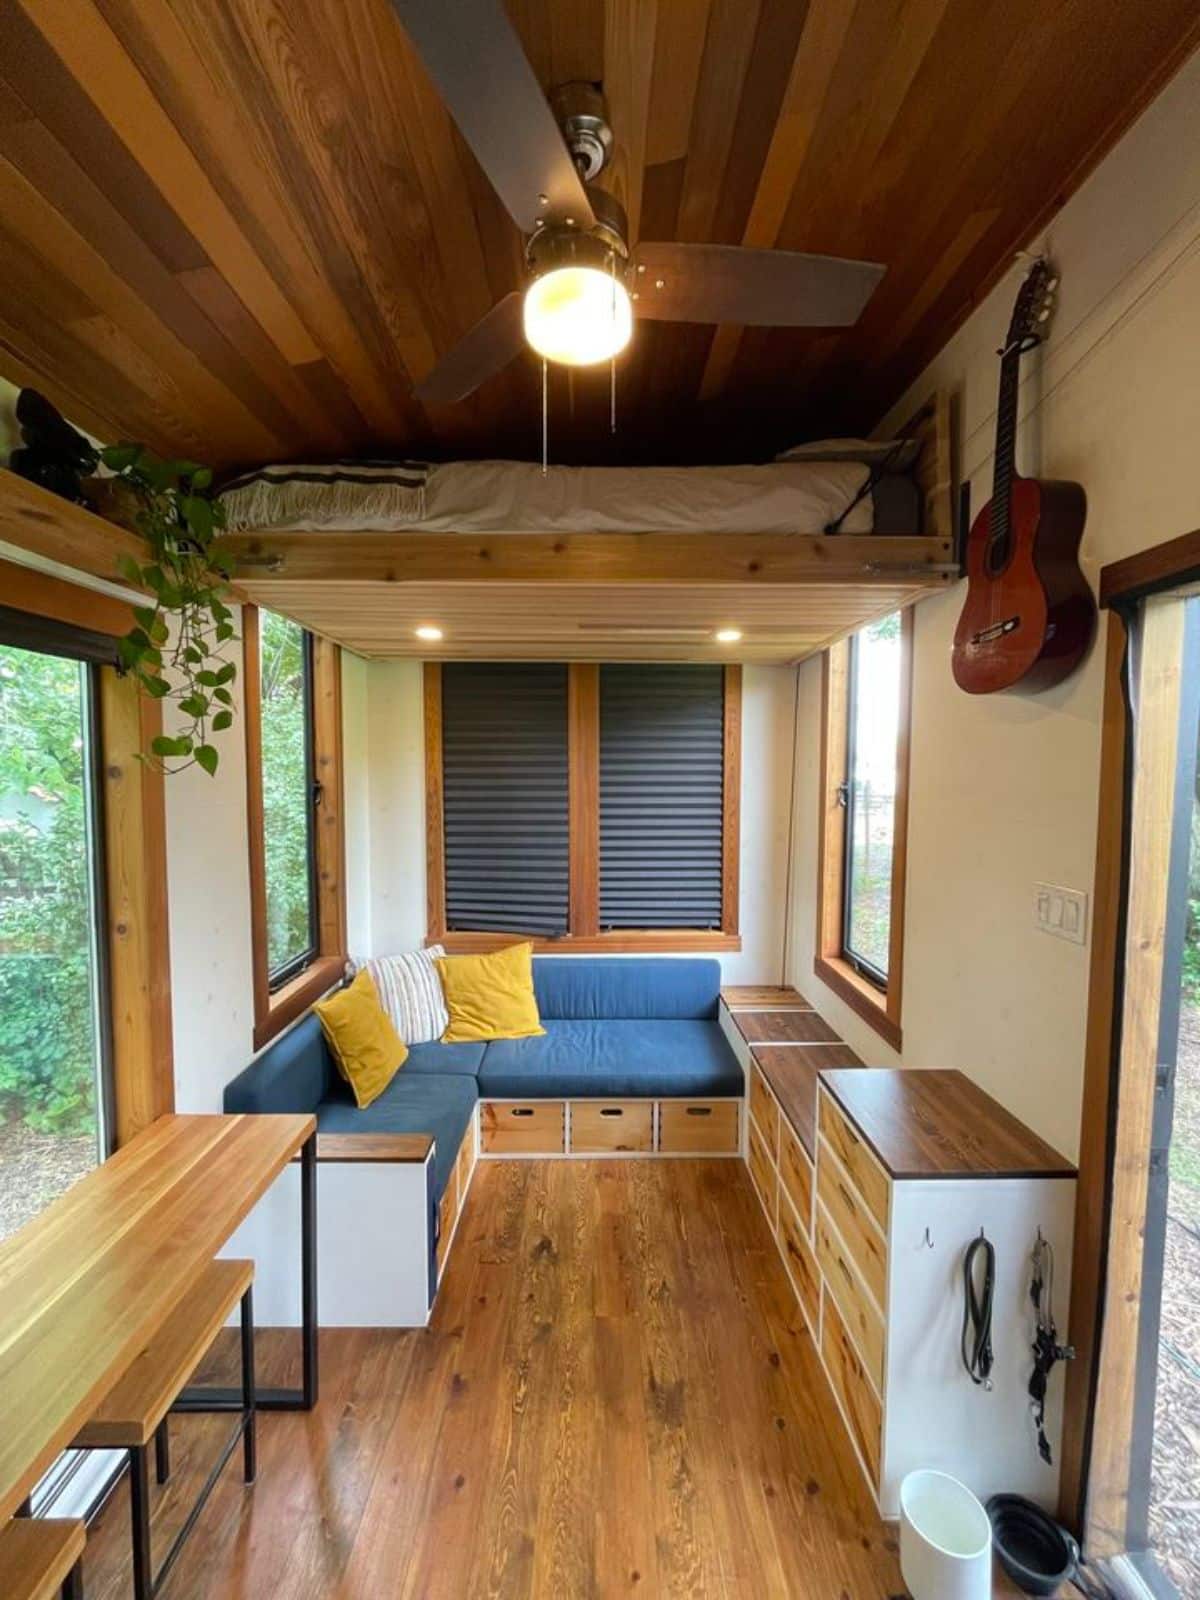 Ceiling fan in living area and stunning wooden interior of 20' Custom Tiny House